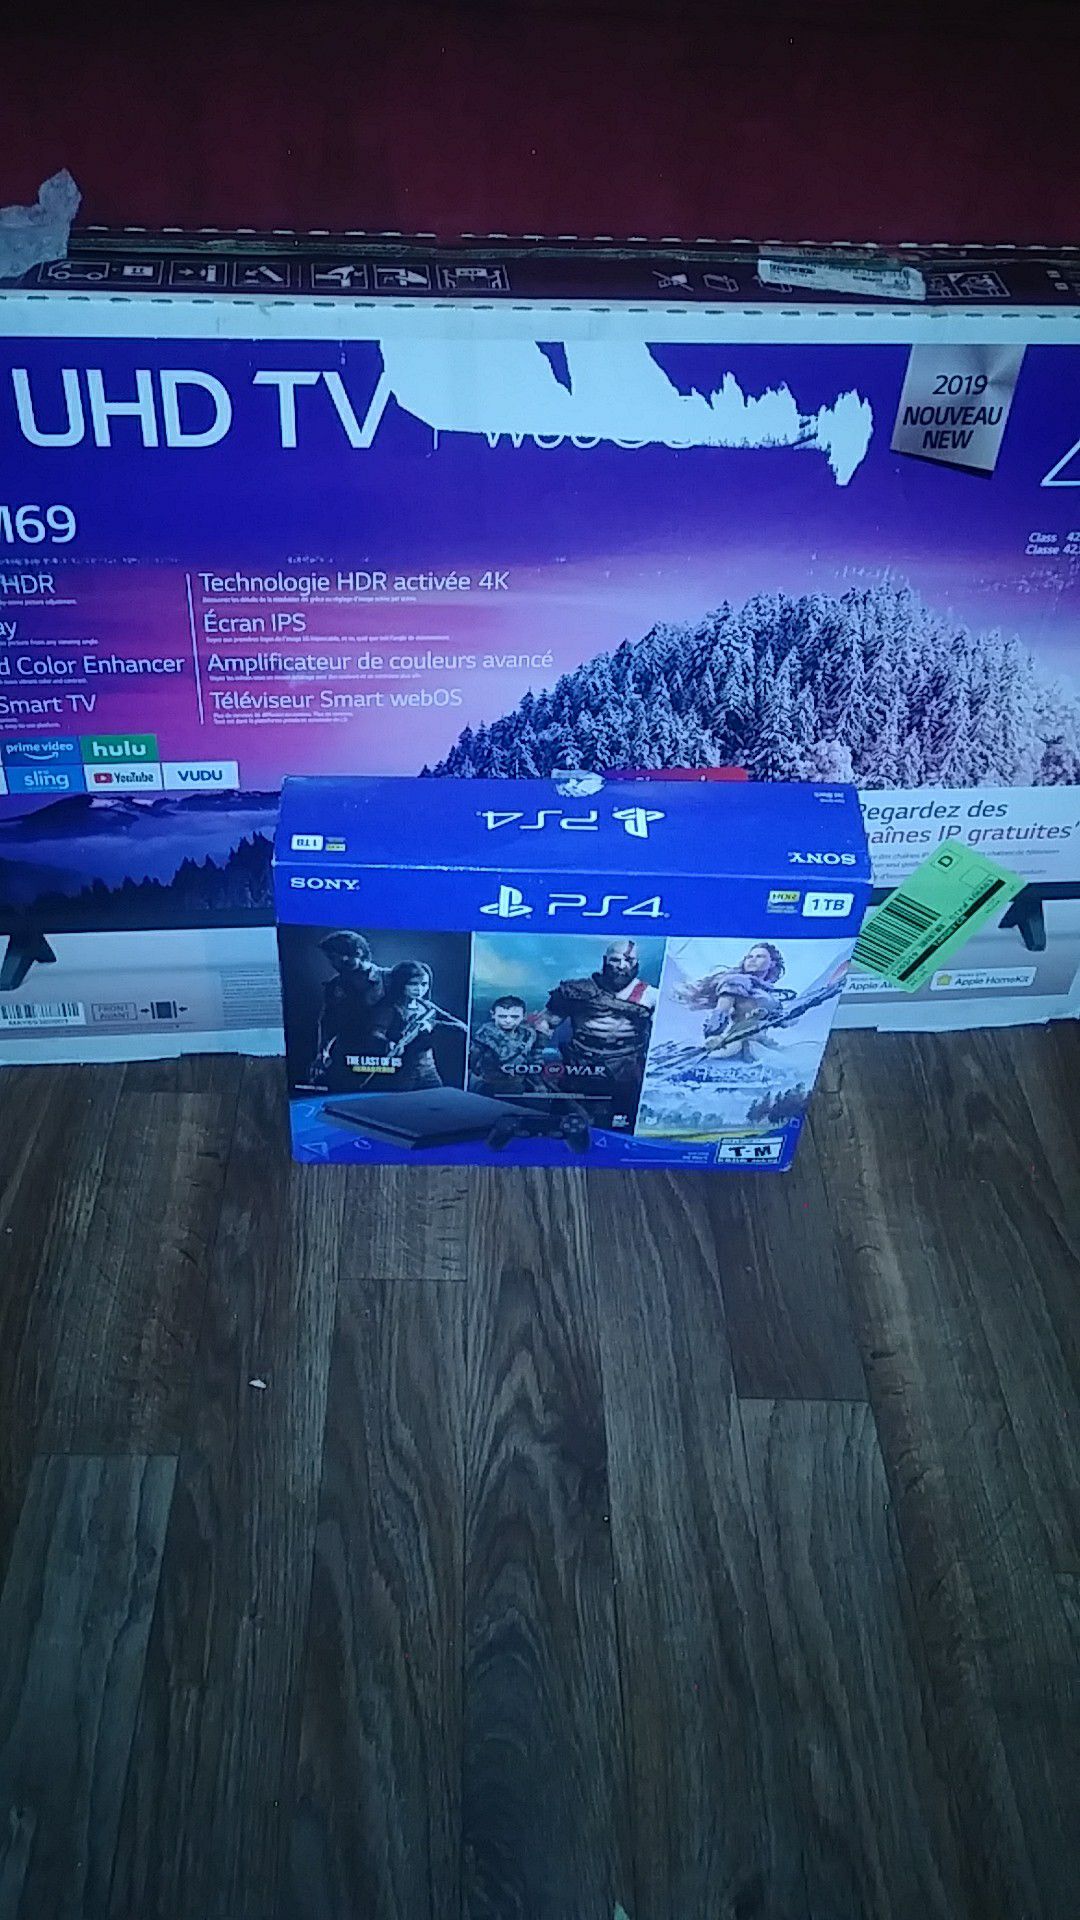 43" and ps4